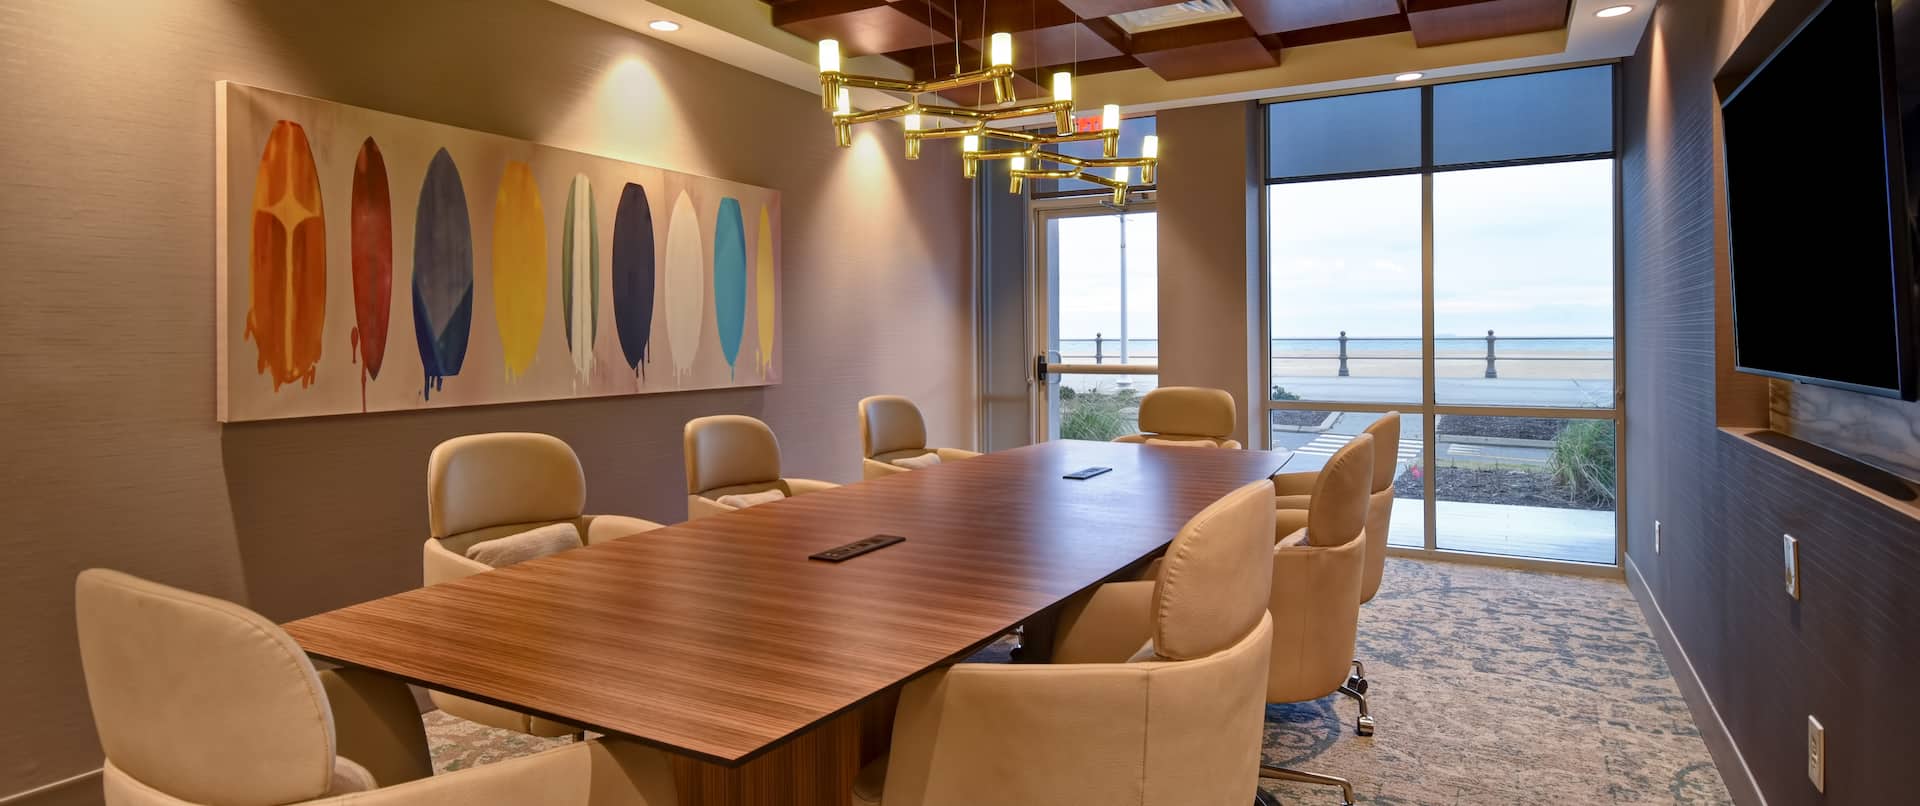 Meeting room with table and chairs